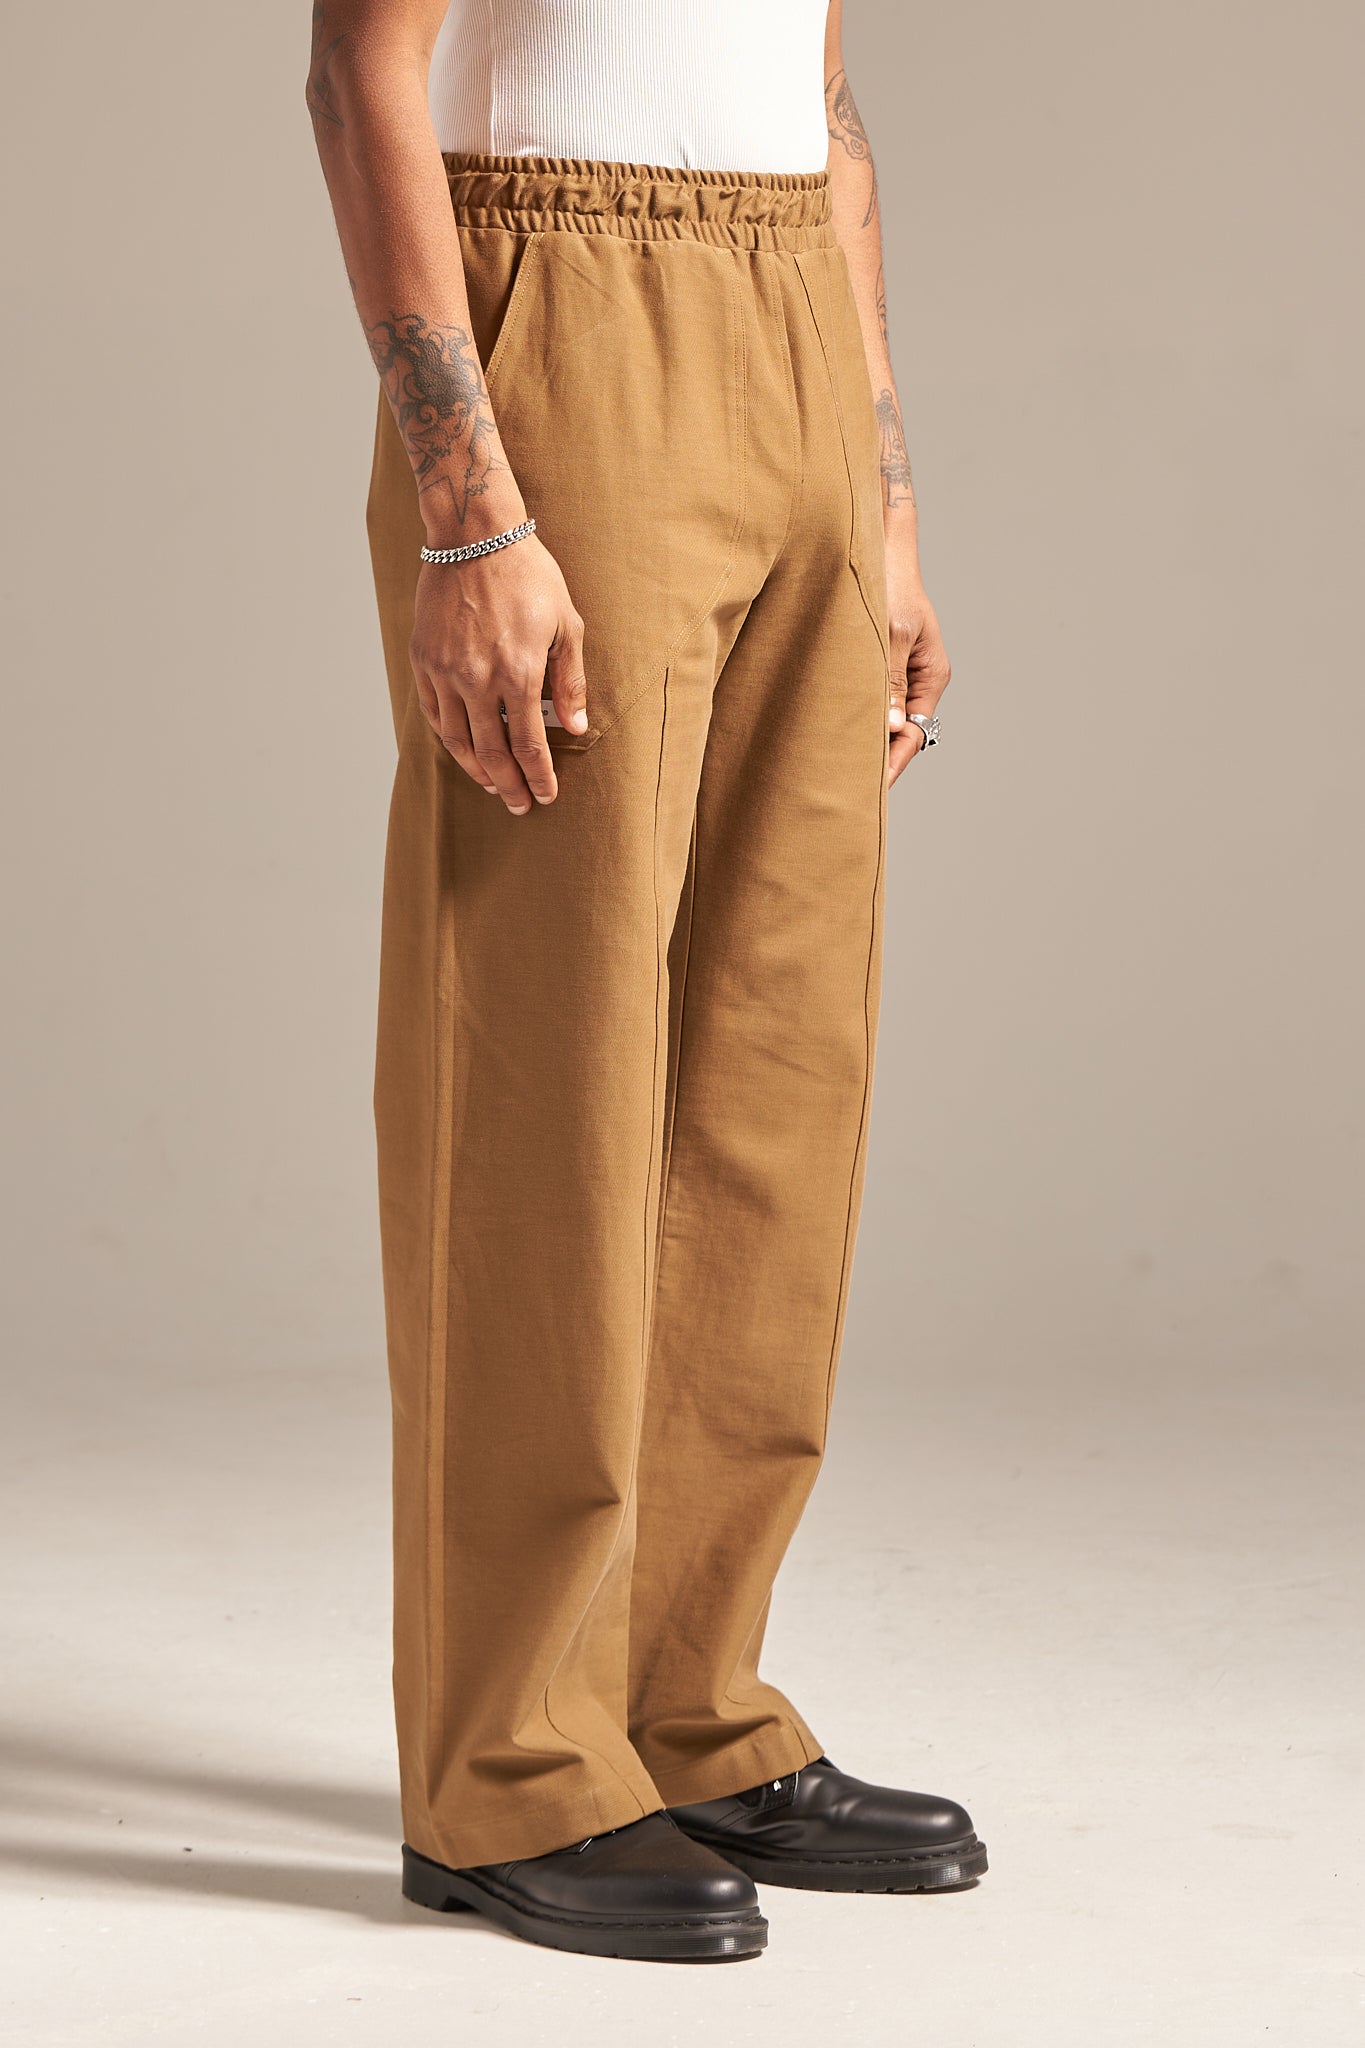 Cotton drill trousers, camel